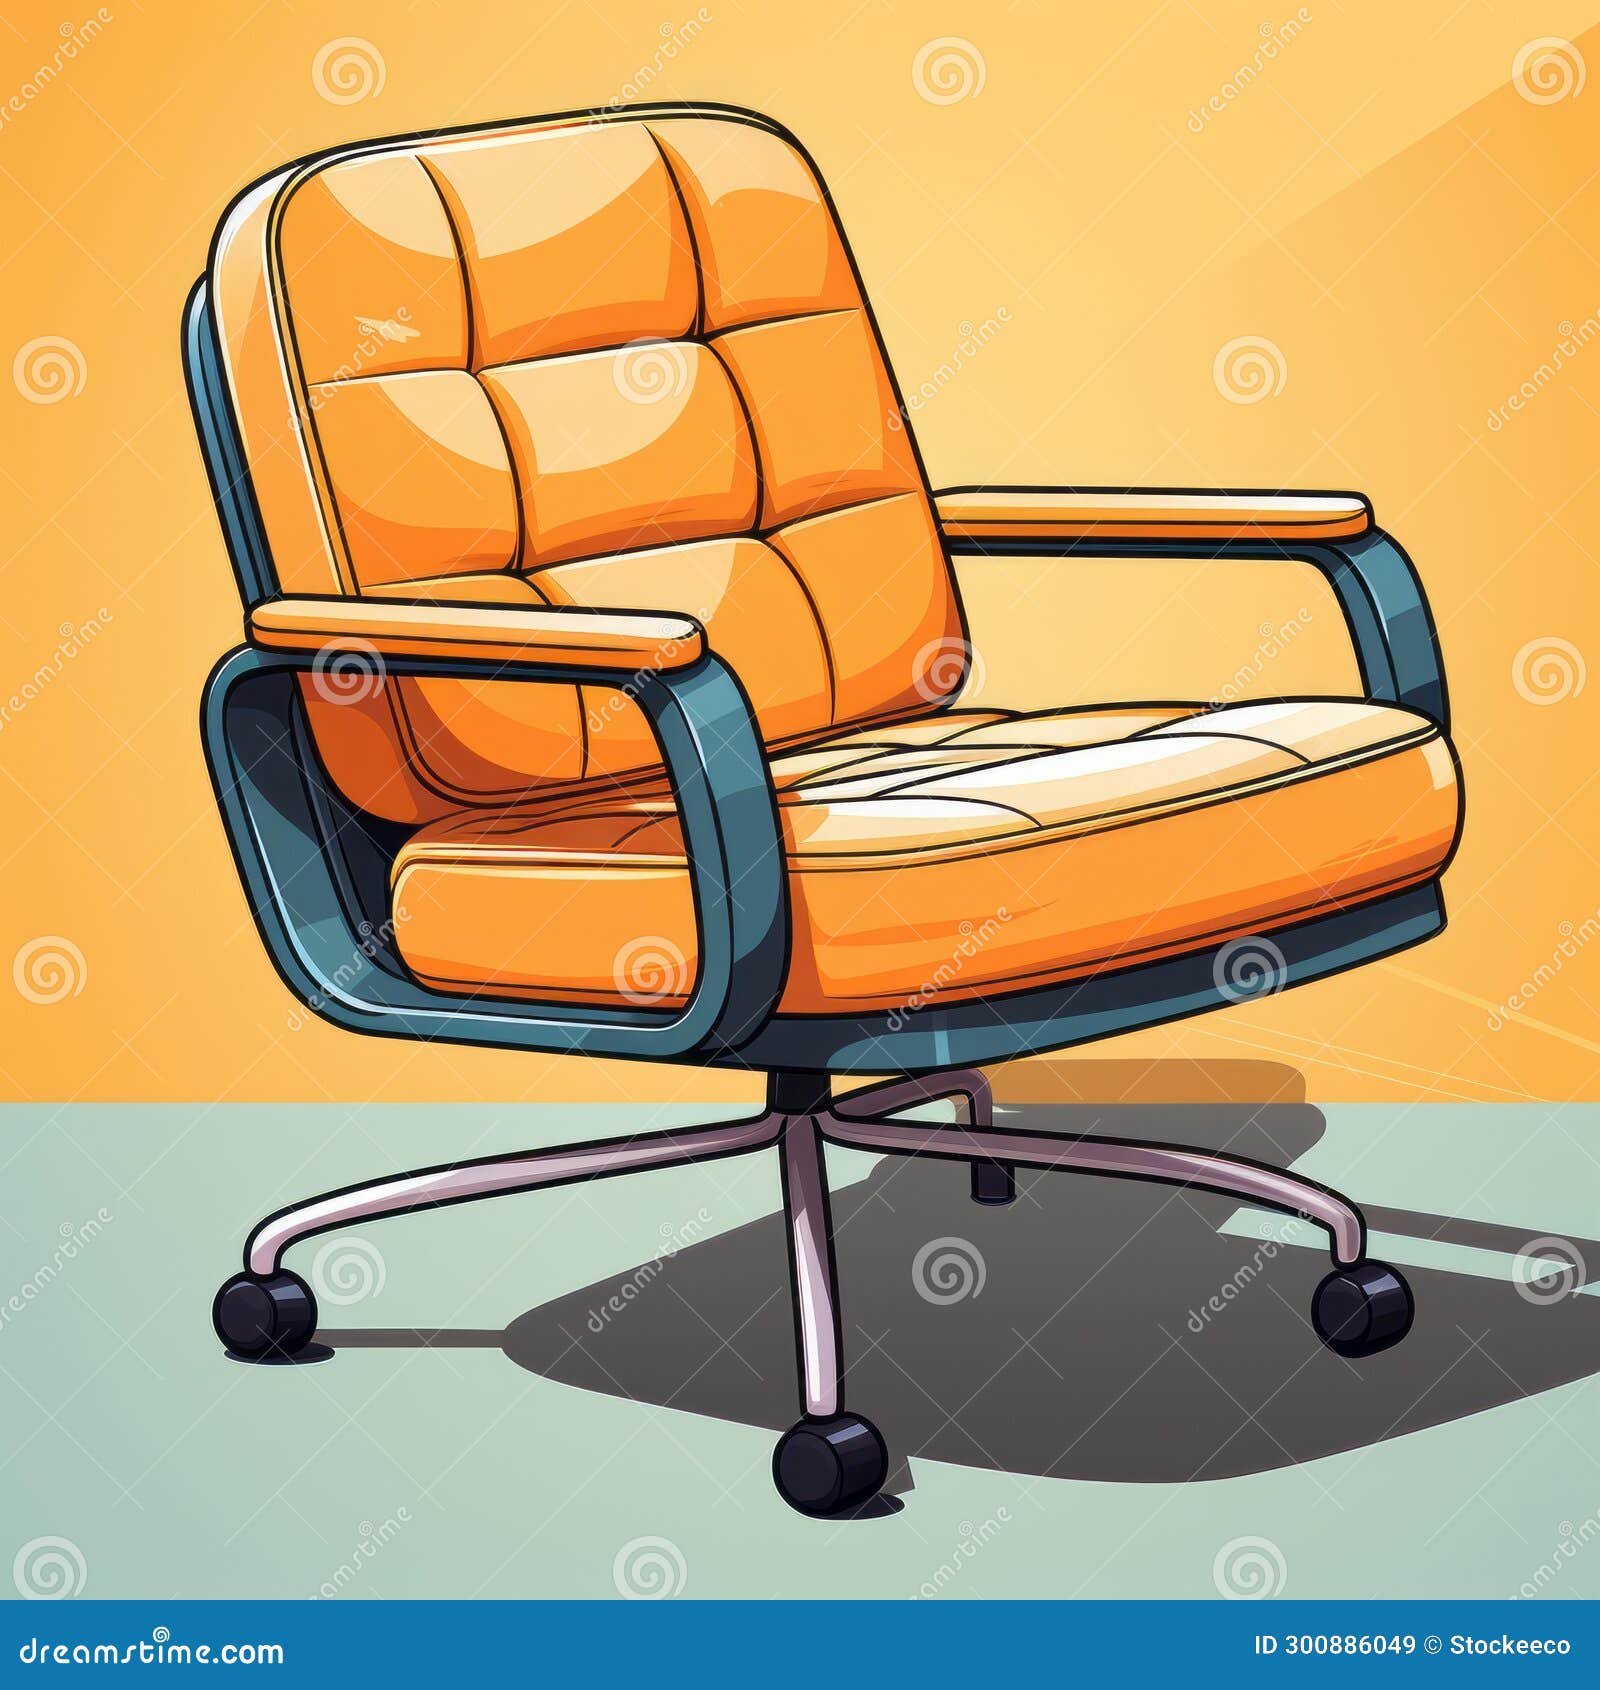 luxurious cartoon office chair with wheels on orange background